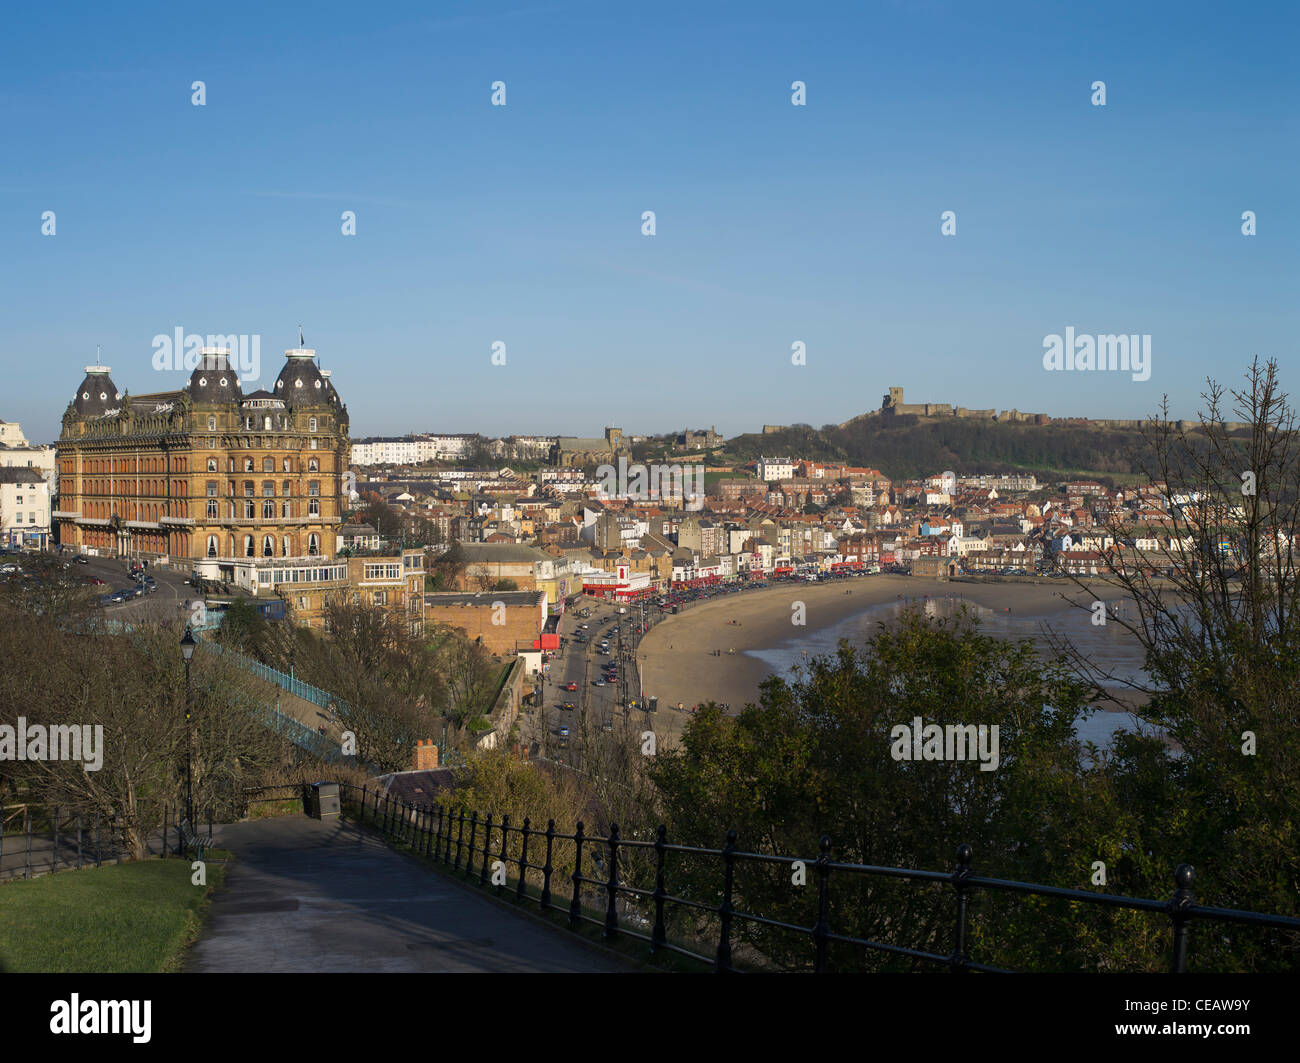 dh South Bay SCARBOROUGH NORTH YORKSHIRE UK Grand Hotel Stockfoto